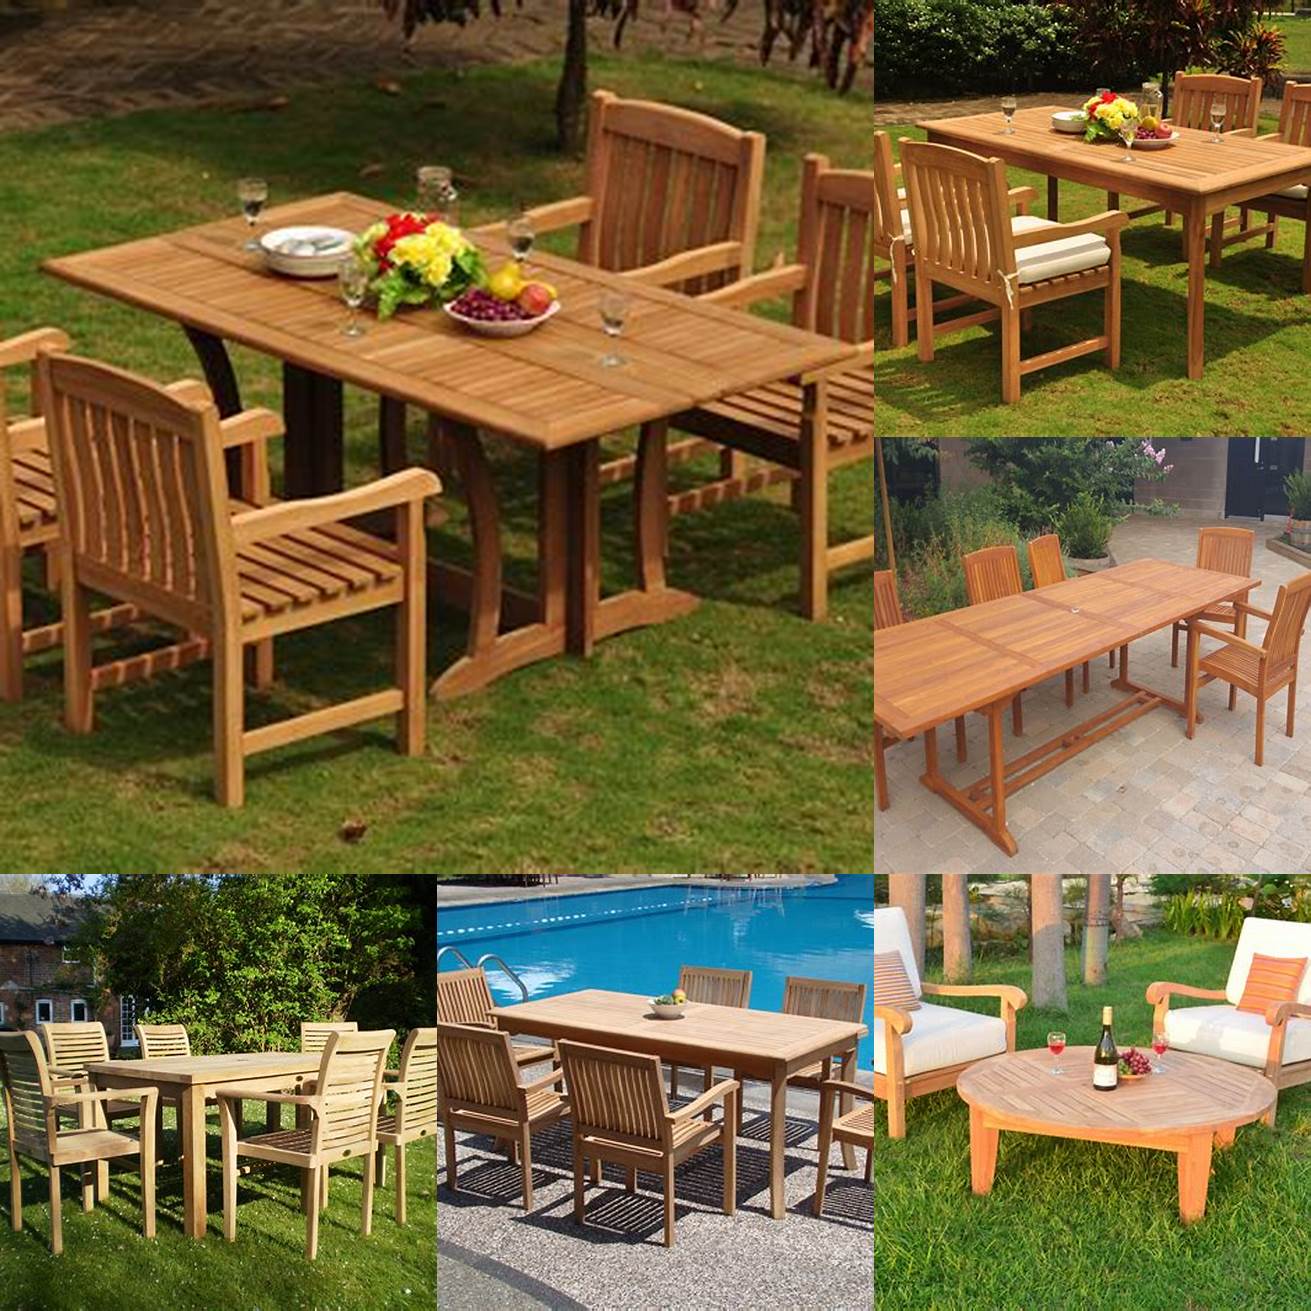 A Picture of Teak Furniture in a Variety of Settings